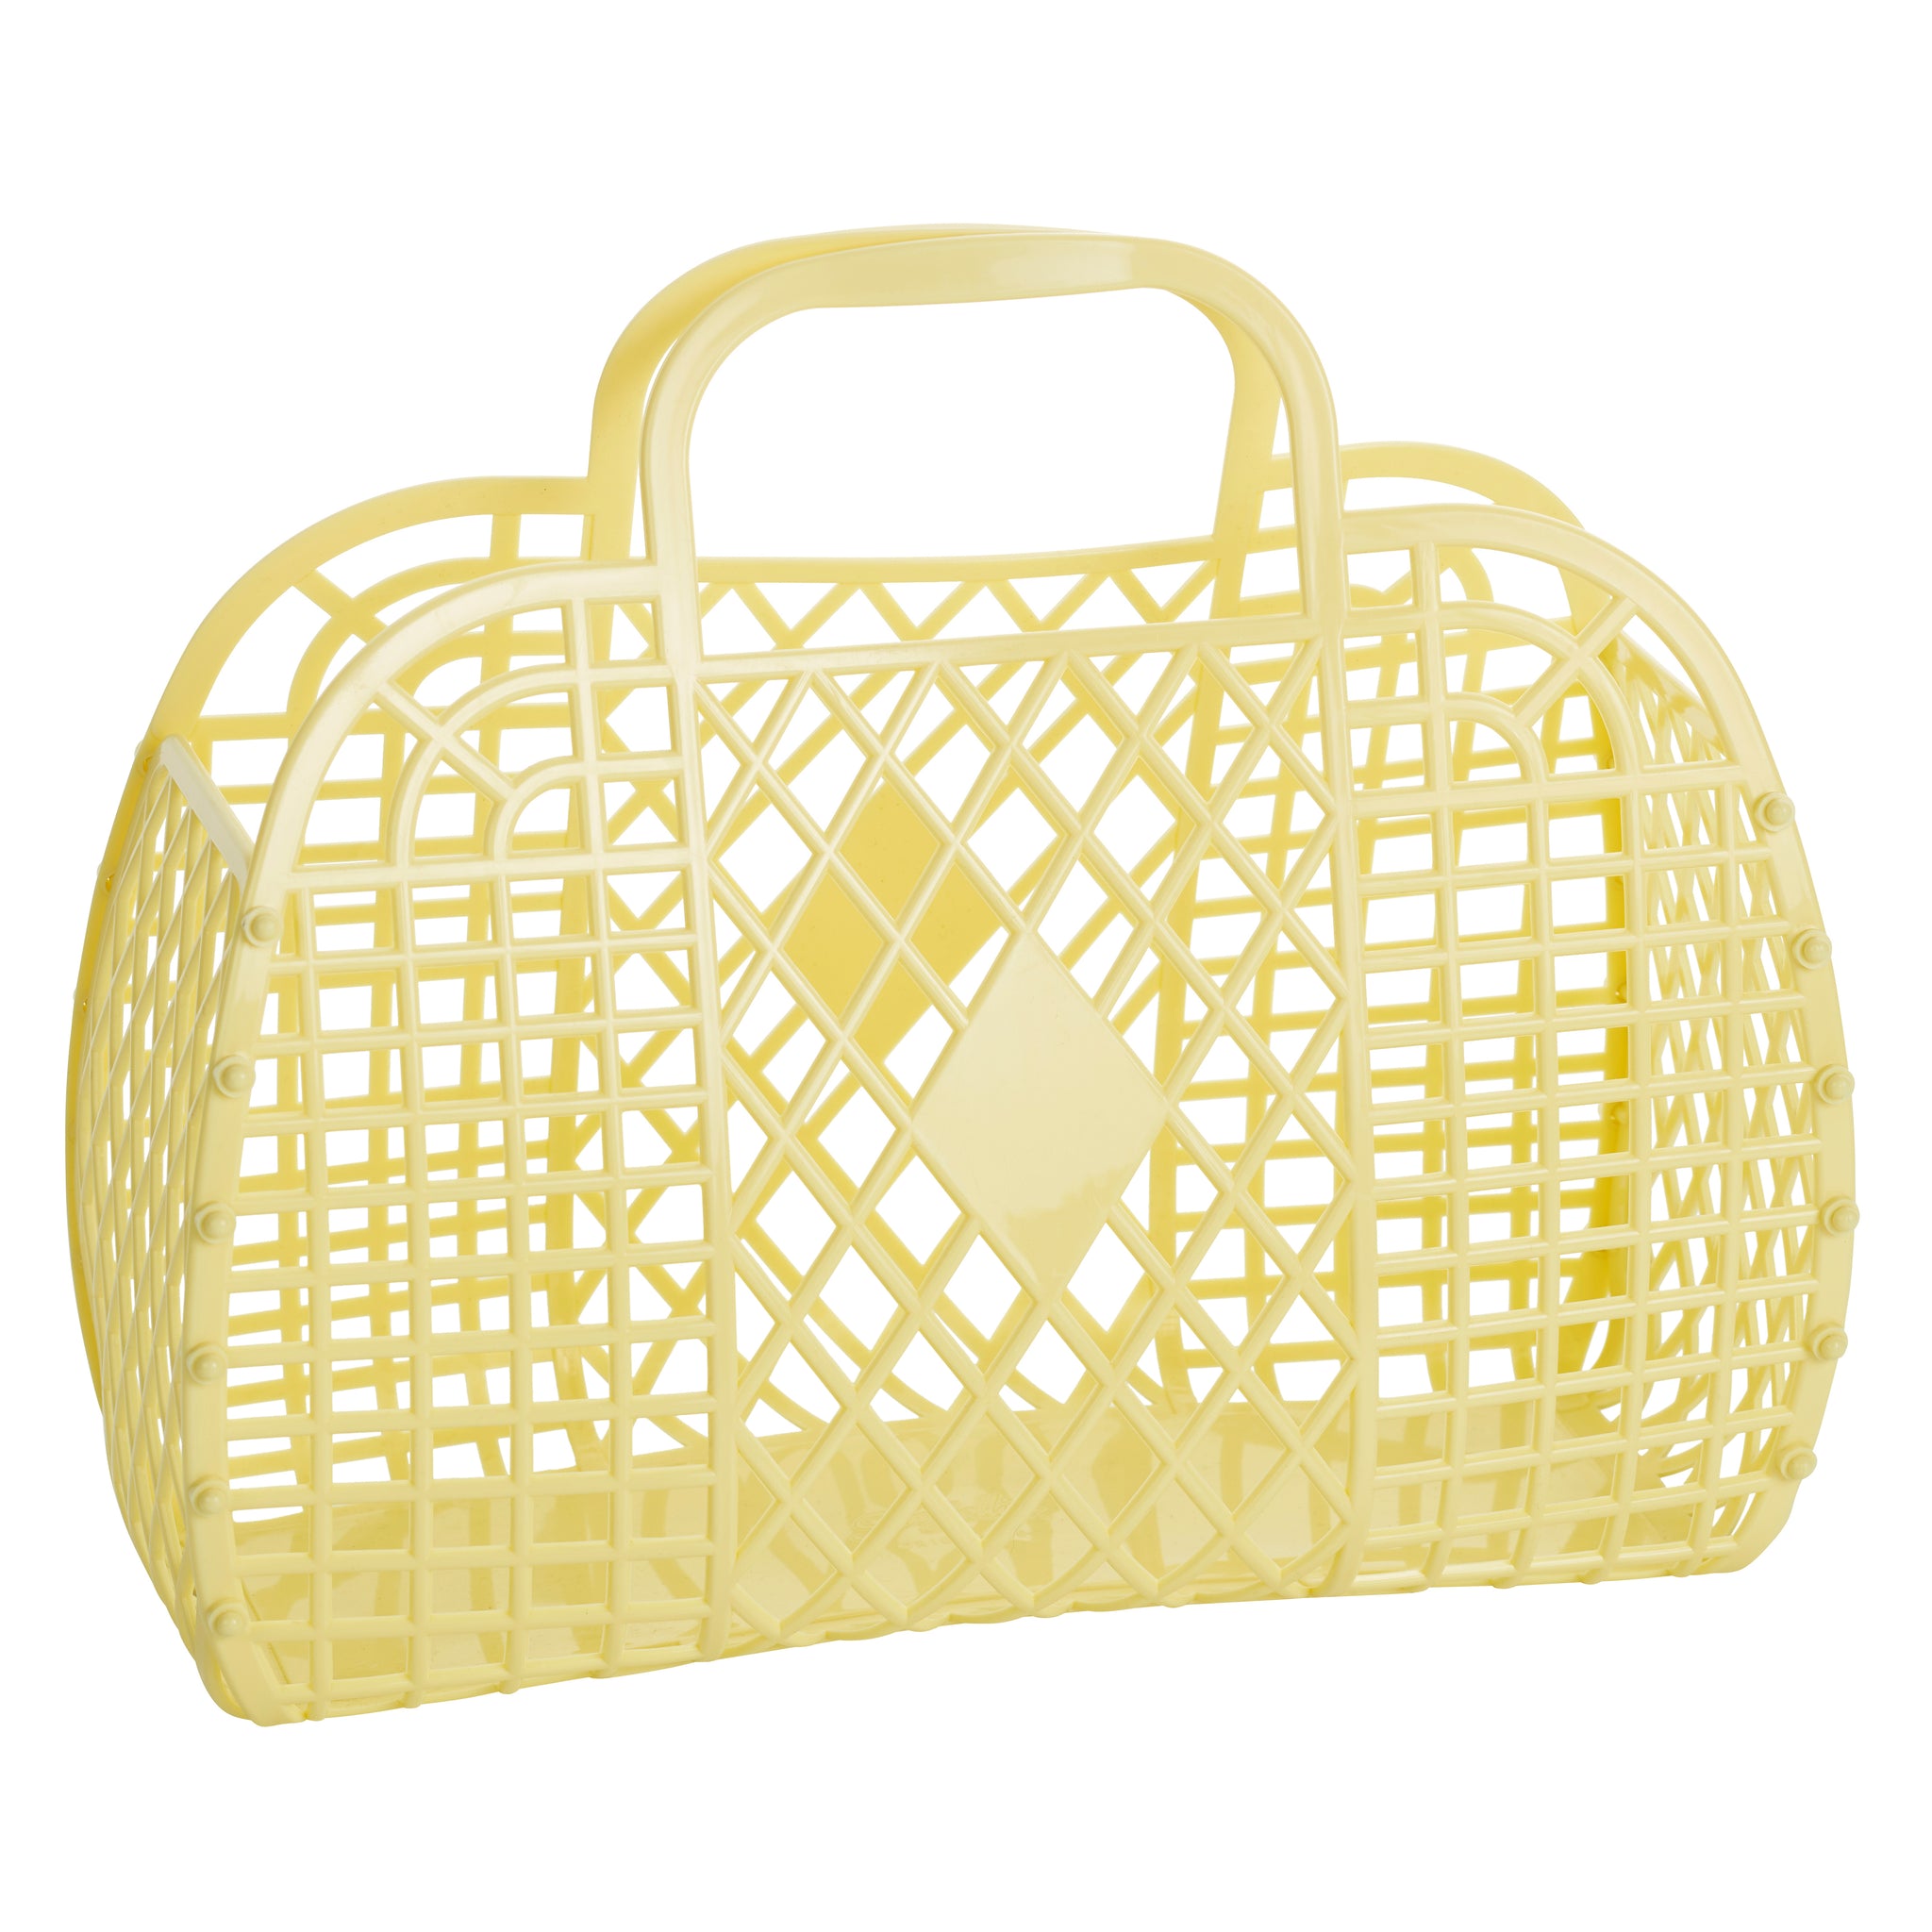 Large Retro Jelly Basket In Yellow - Filli London